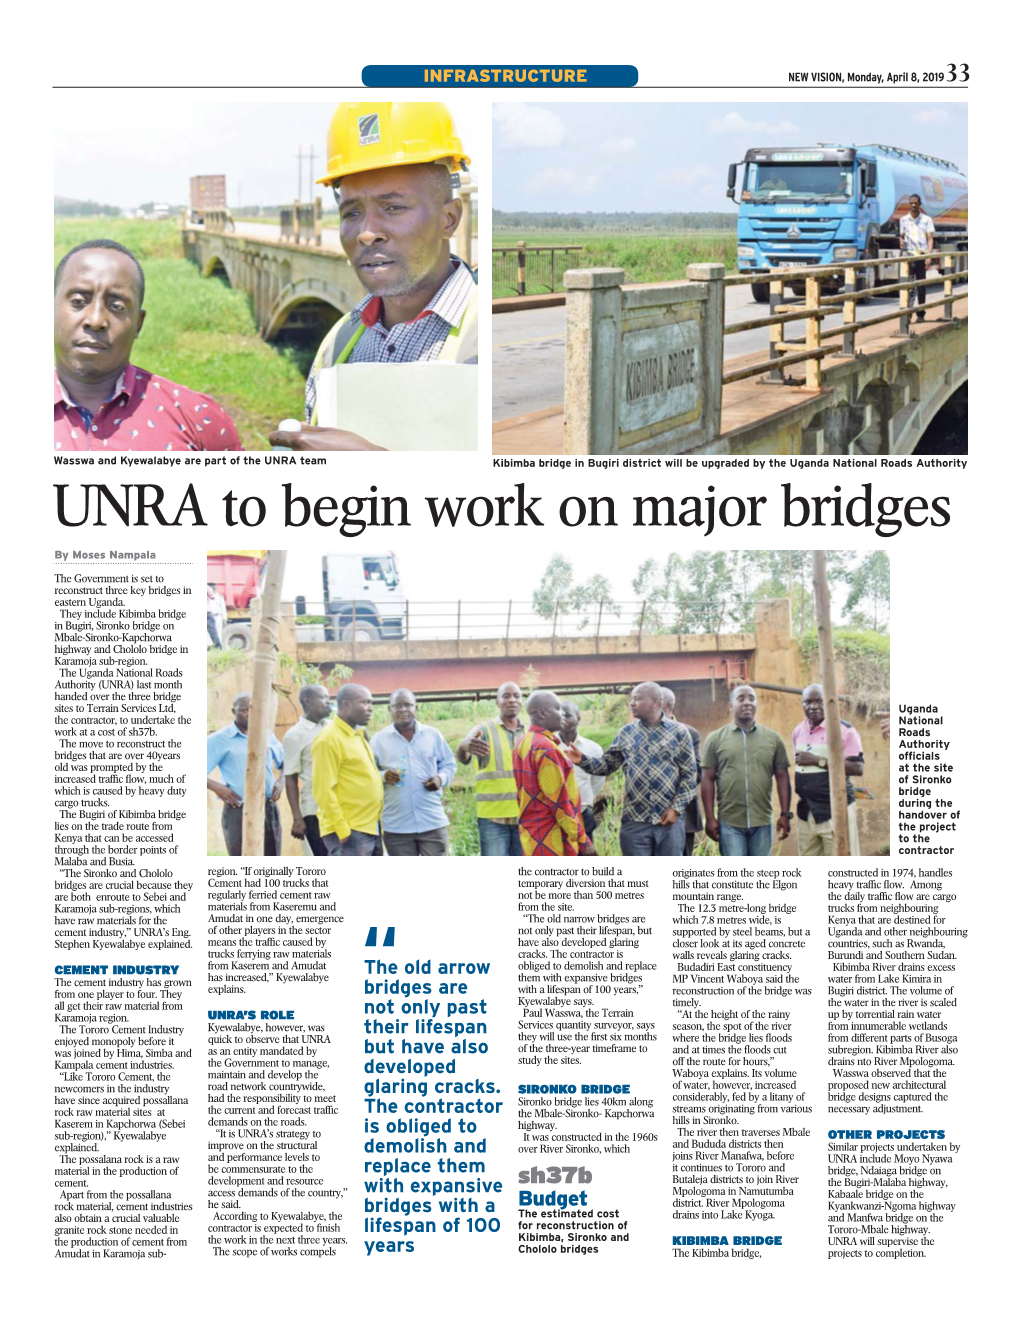 UNRA to Begin Work on Major Bridges by Moses Nampala